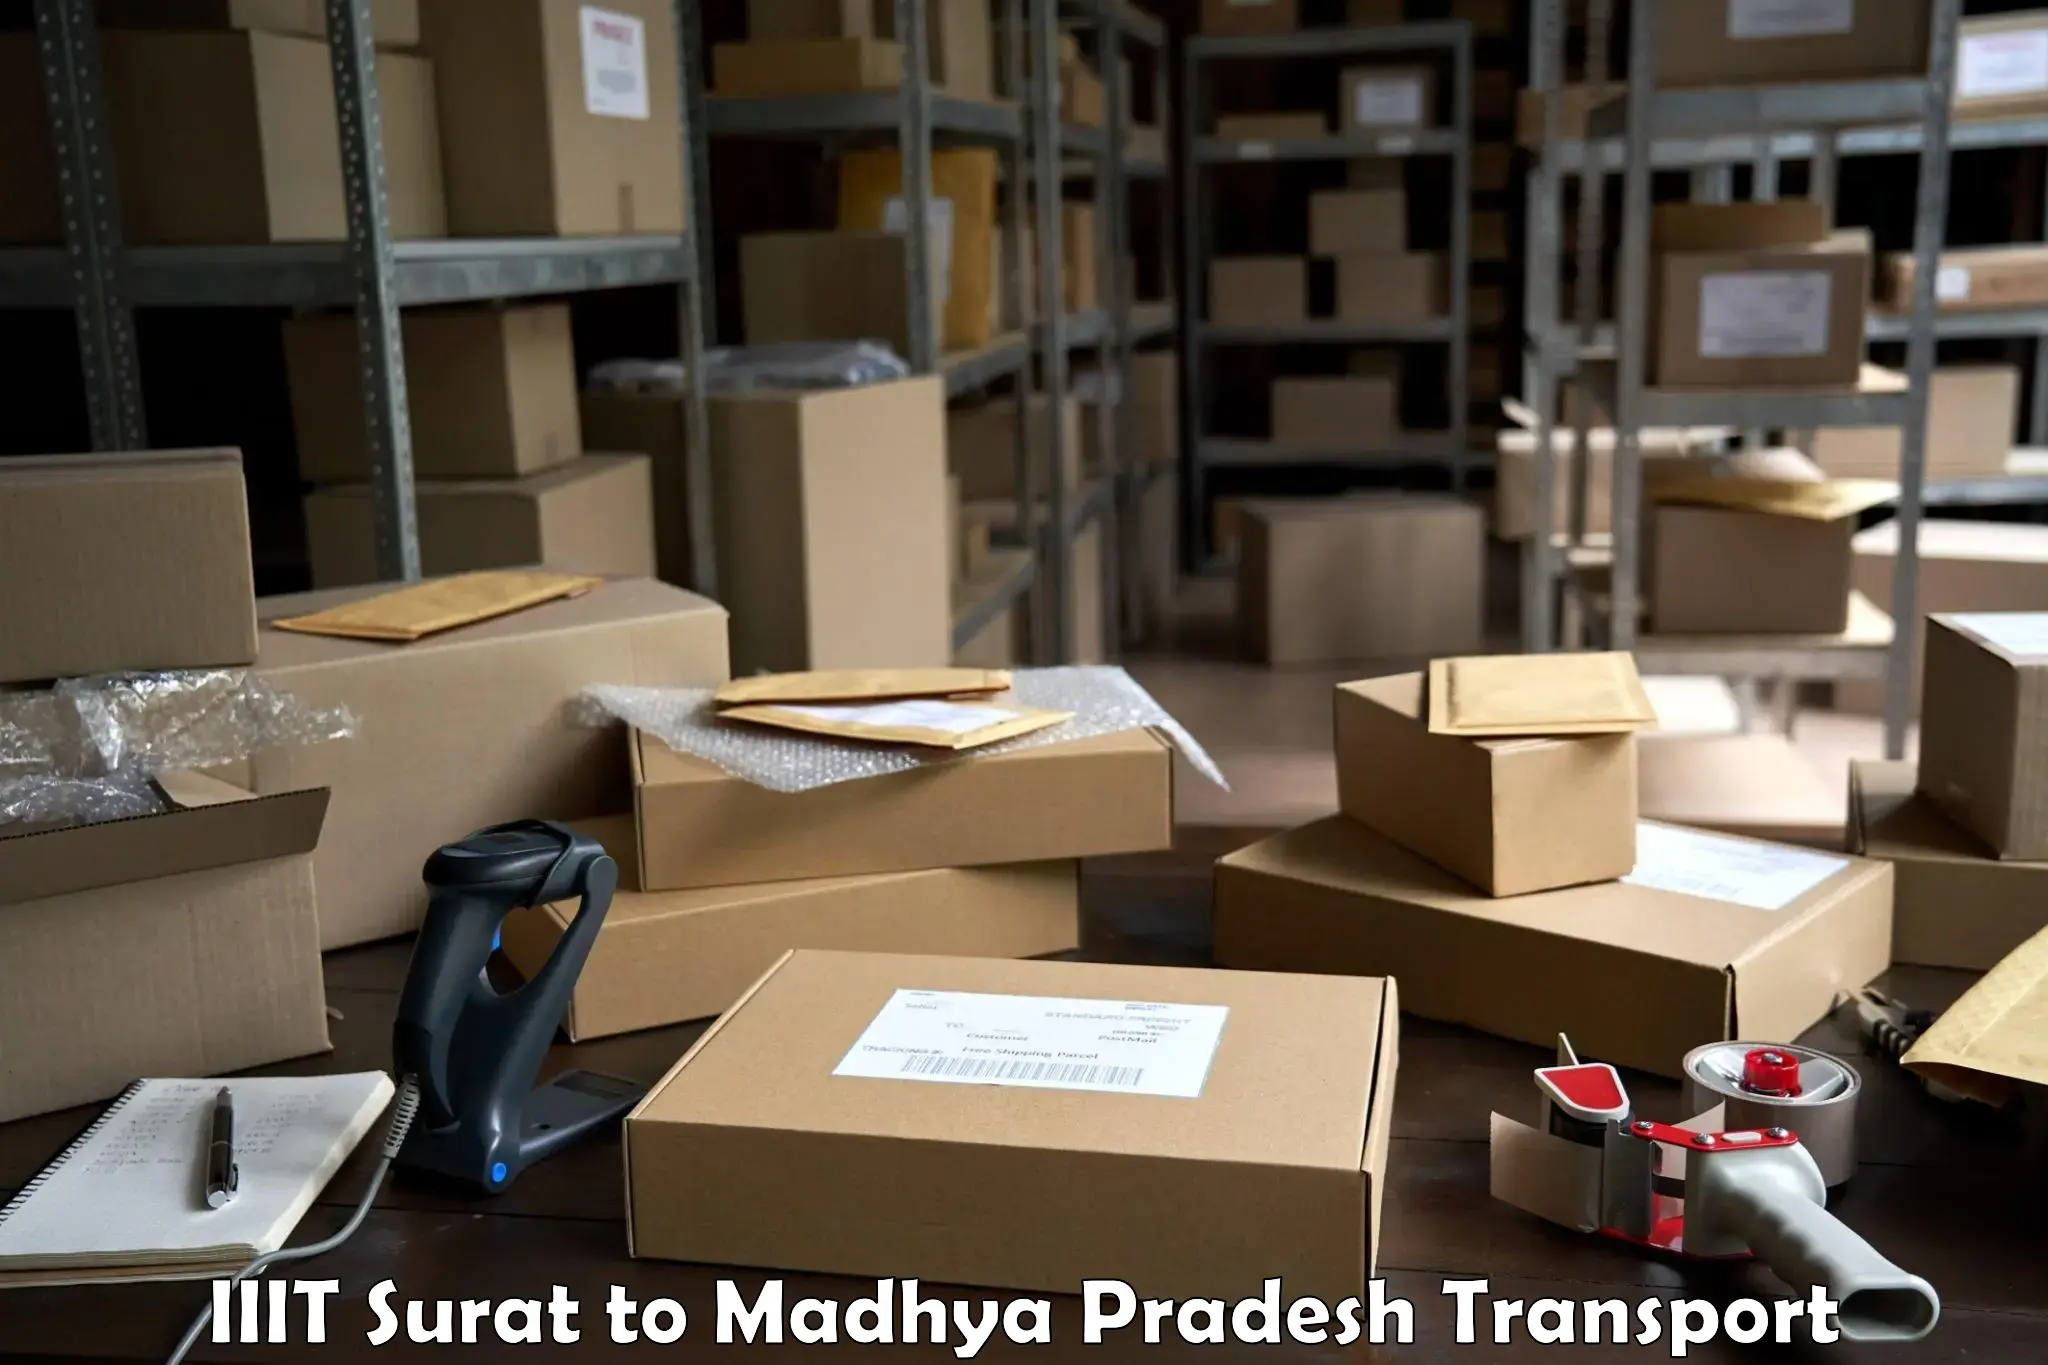 Air freight transport services IIIT Surat to Bhopal